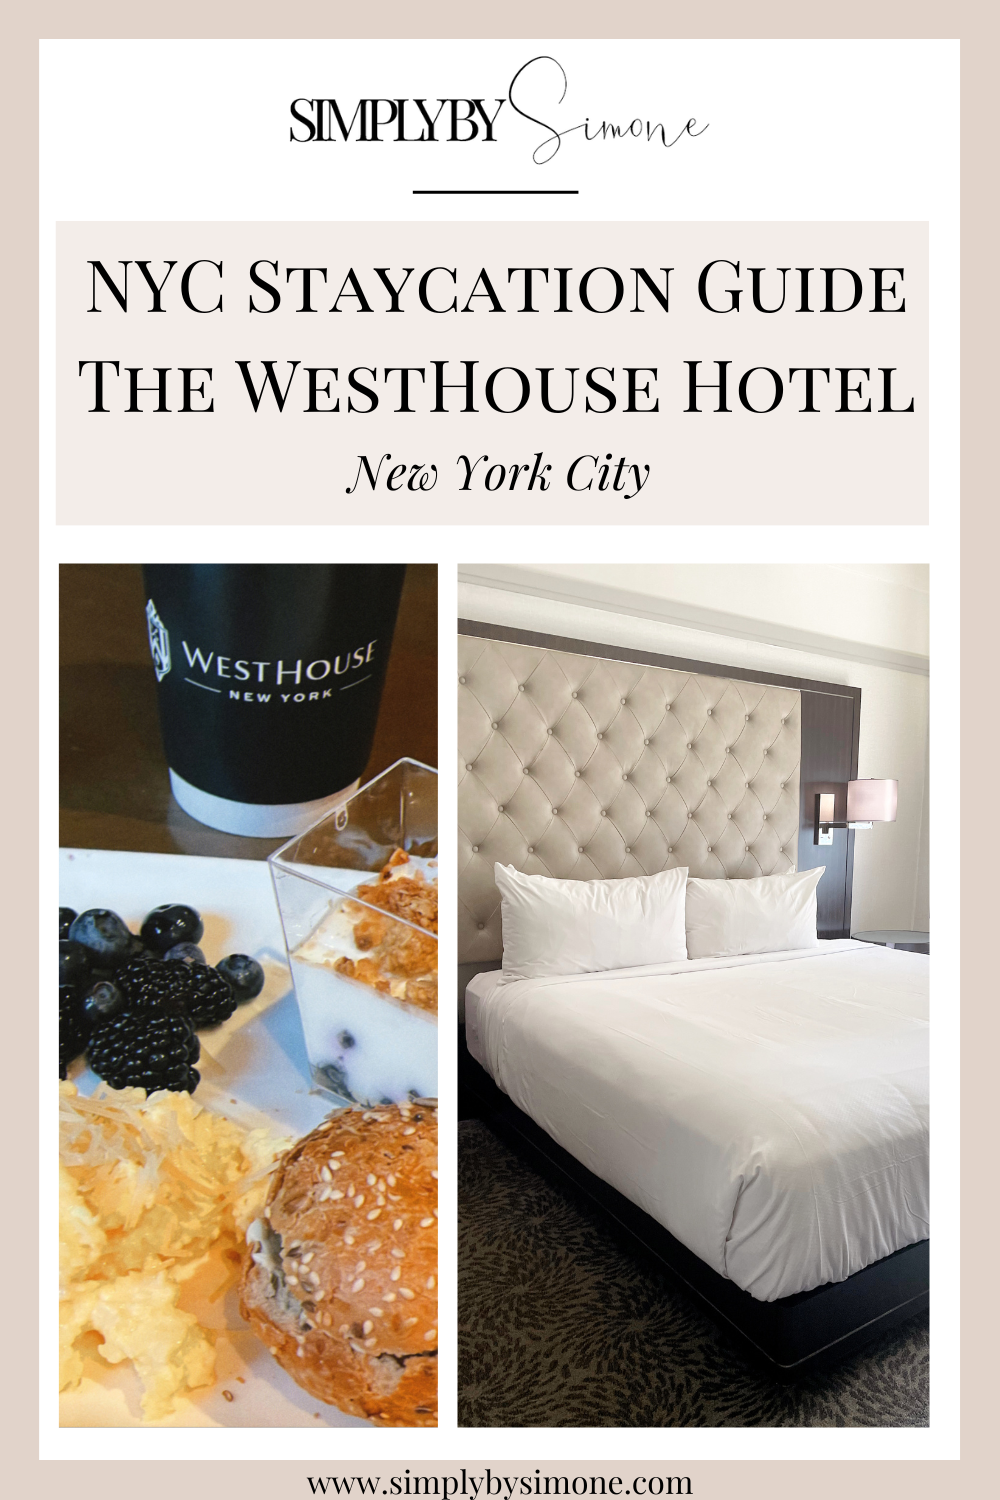 NYC Staycation Guide The WestHouse Hotel New York City | 2 Days in New York City | 48 Hours in New York City | The Perfect Weekend Itinerary | Best Things to Do in New York City | Explore New York, NY | Weekend in New York, New York | New York City Travel Guide | Top Things to do in New York City | WestHouse Hotel NYC | Cover Image | Simply by Simone